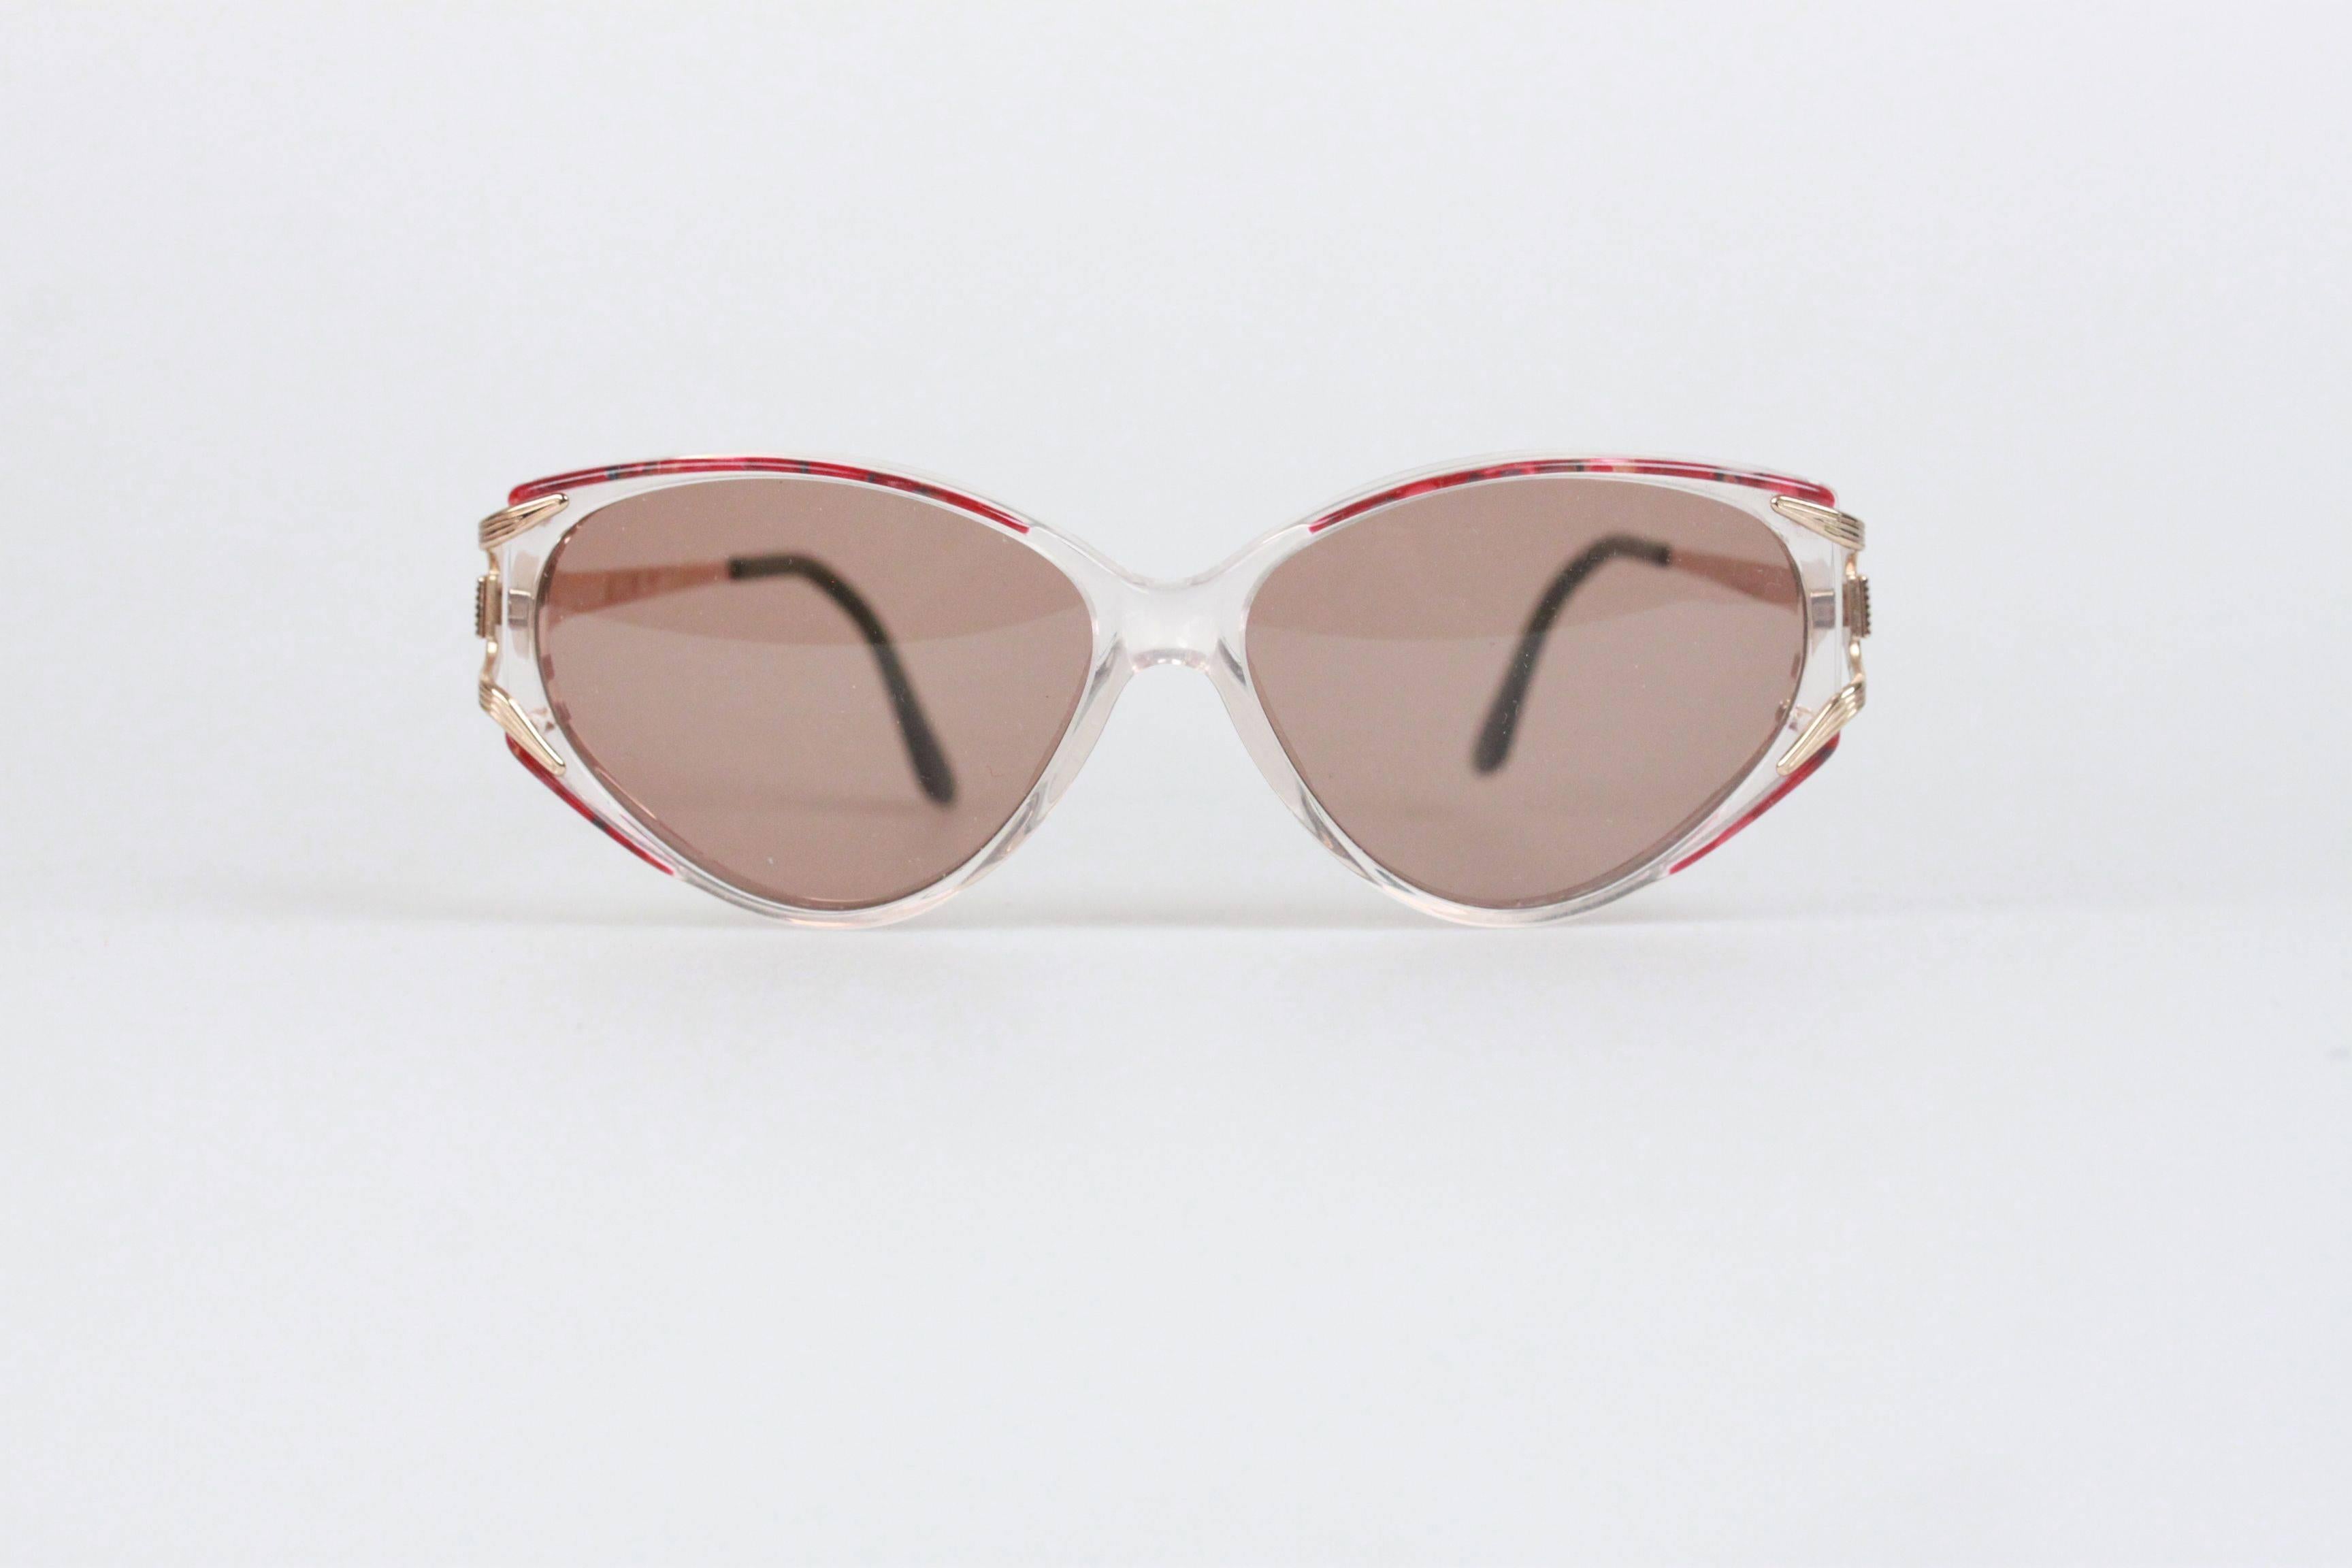 - Vintage YVES SAINT LAURENT sunglasses 
- mod: 5032 Y651 55/13 135
- Beautiful Red Marbled effect on the top part of the frame 
- Brown MINT 100% UV GRADIENT lens

Any other detail which is not mentioned may be seen on the item pictures. Please do